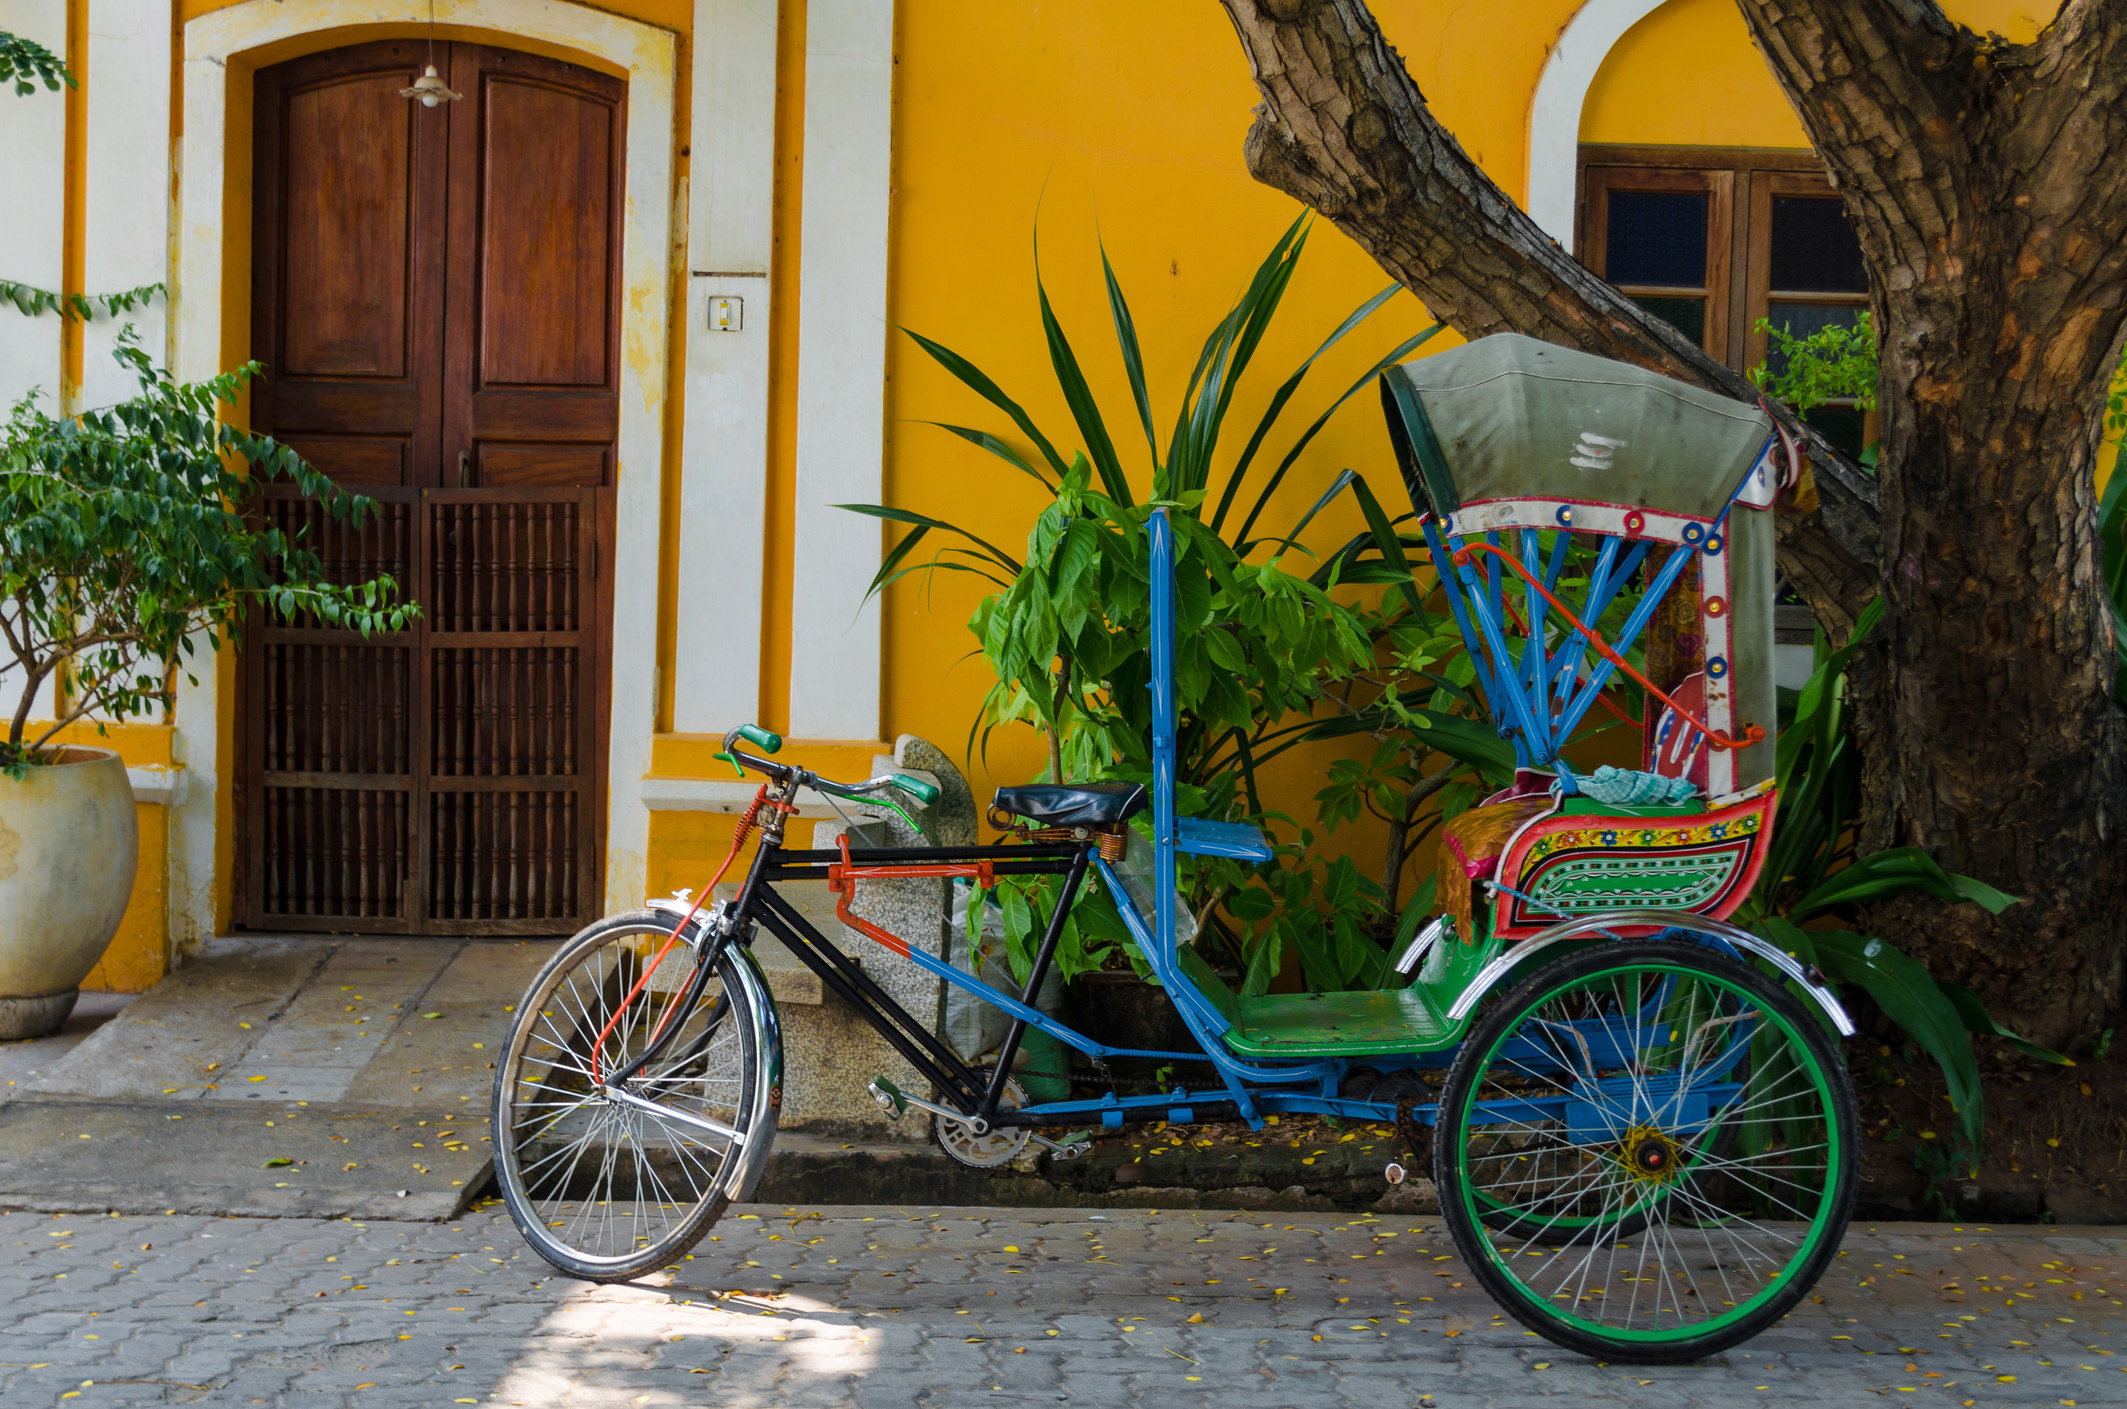 A rickshaw parked next to a colorful building.